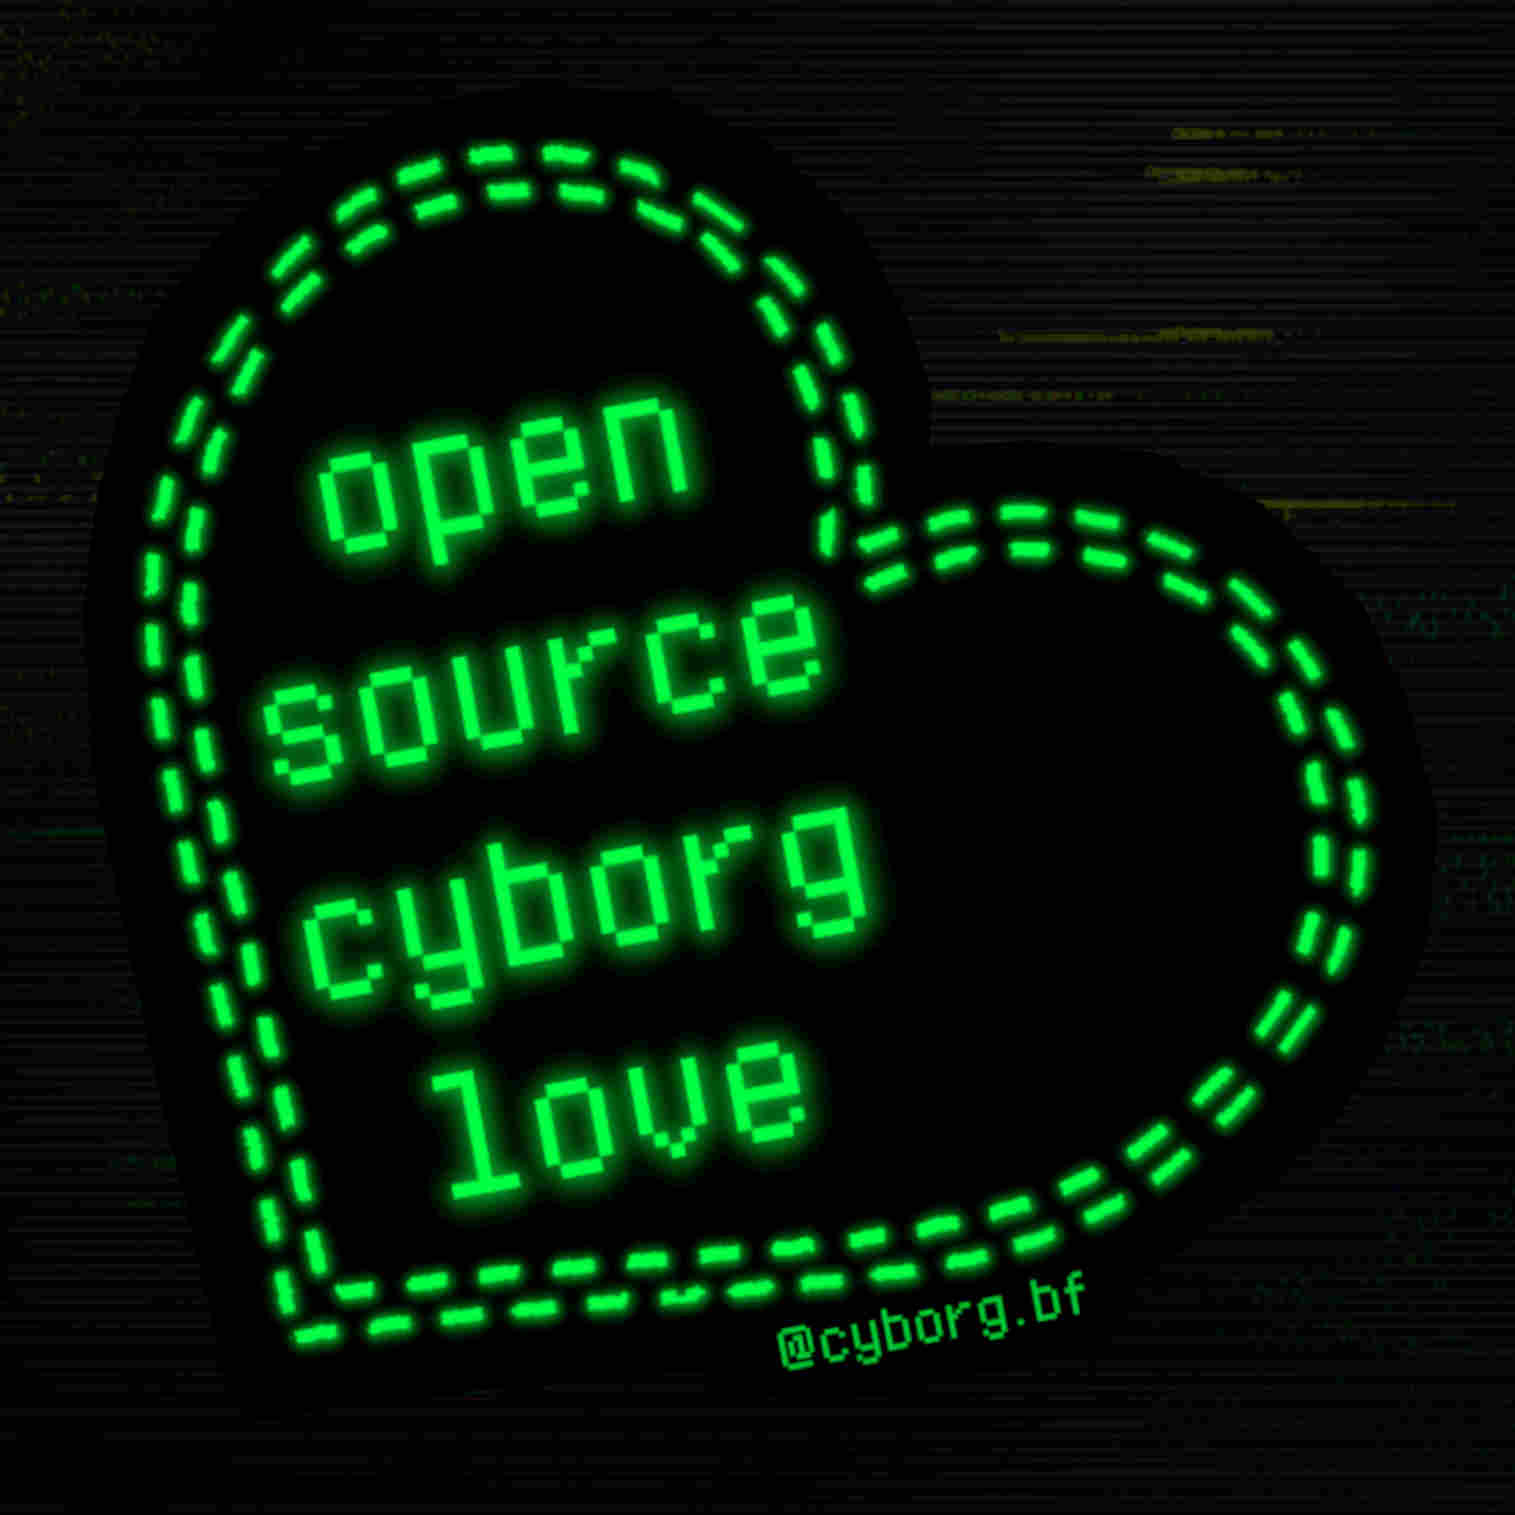 heart-shaped sticker that says : Open source cyborg love in green